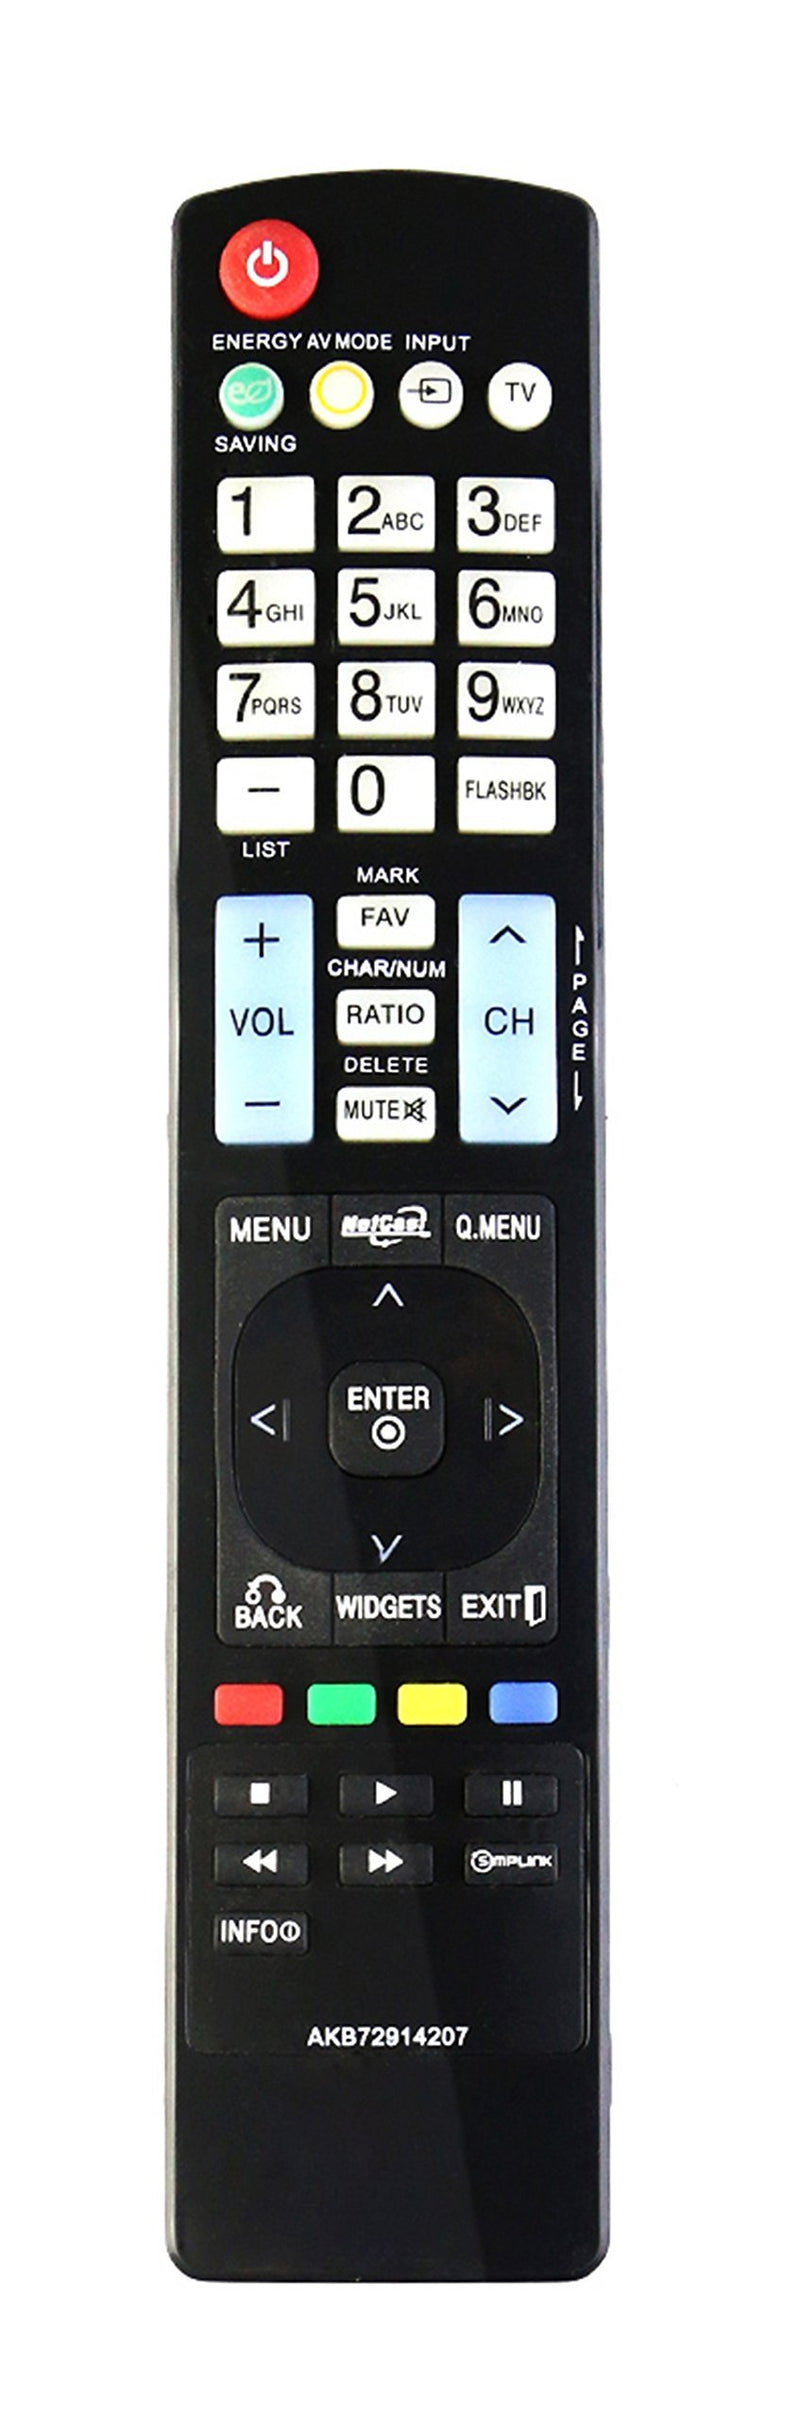 Vinabty New AKB72914207 Replaced Remote Fit for LG AKB72914003 AKB72914240 AKB72915206 TV 32LD550UB 32LD550 32LD550 32LD550 42LD550 42LD550 46LD550 47LD650 42LD550UB